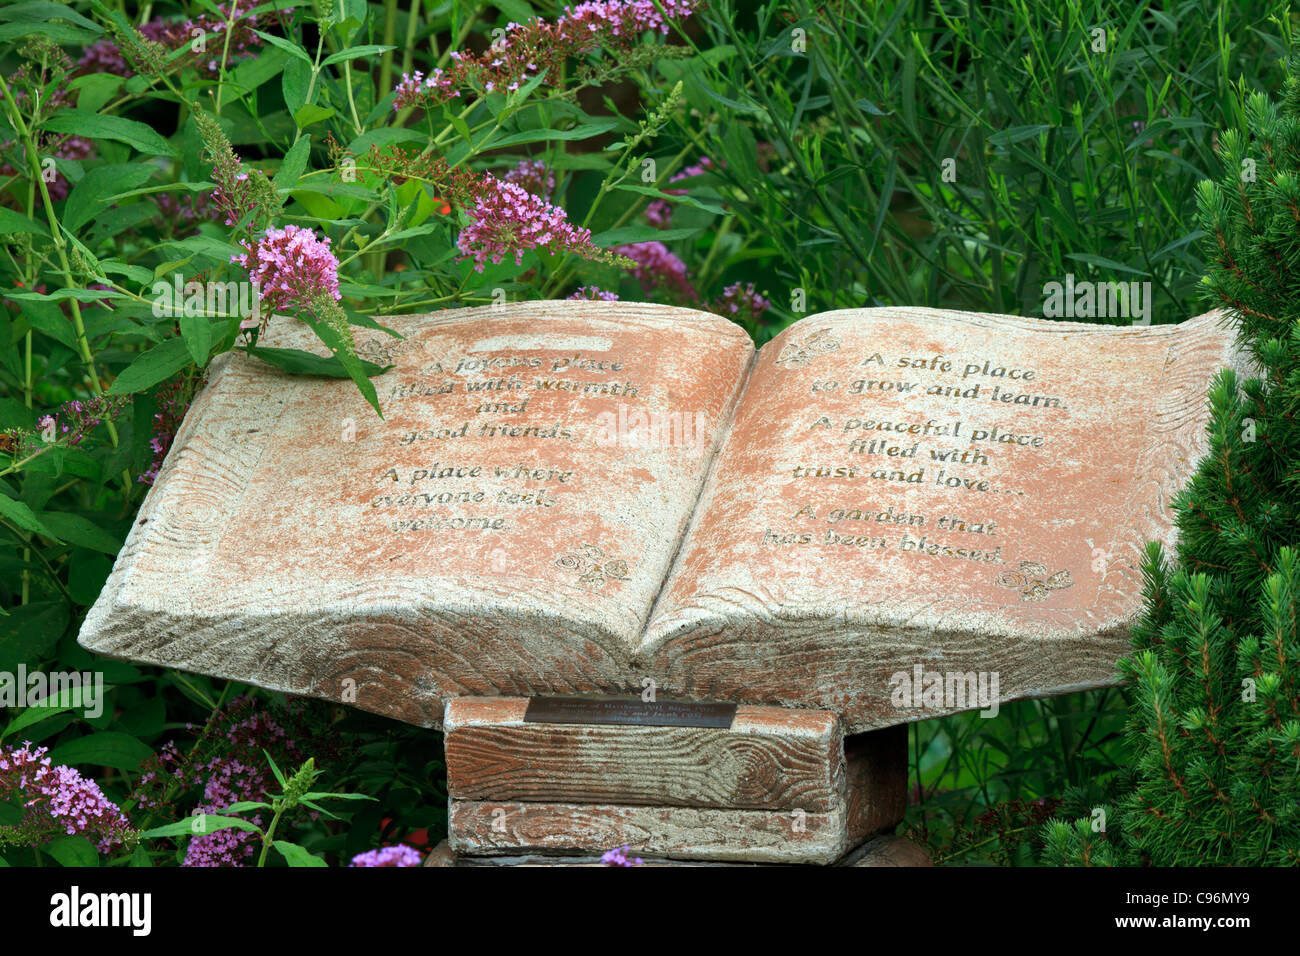 Garden statue of a book with inspirational verse Stock Photo